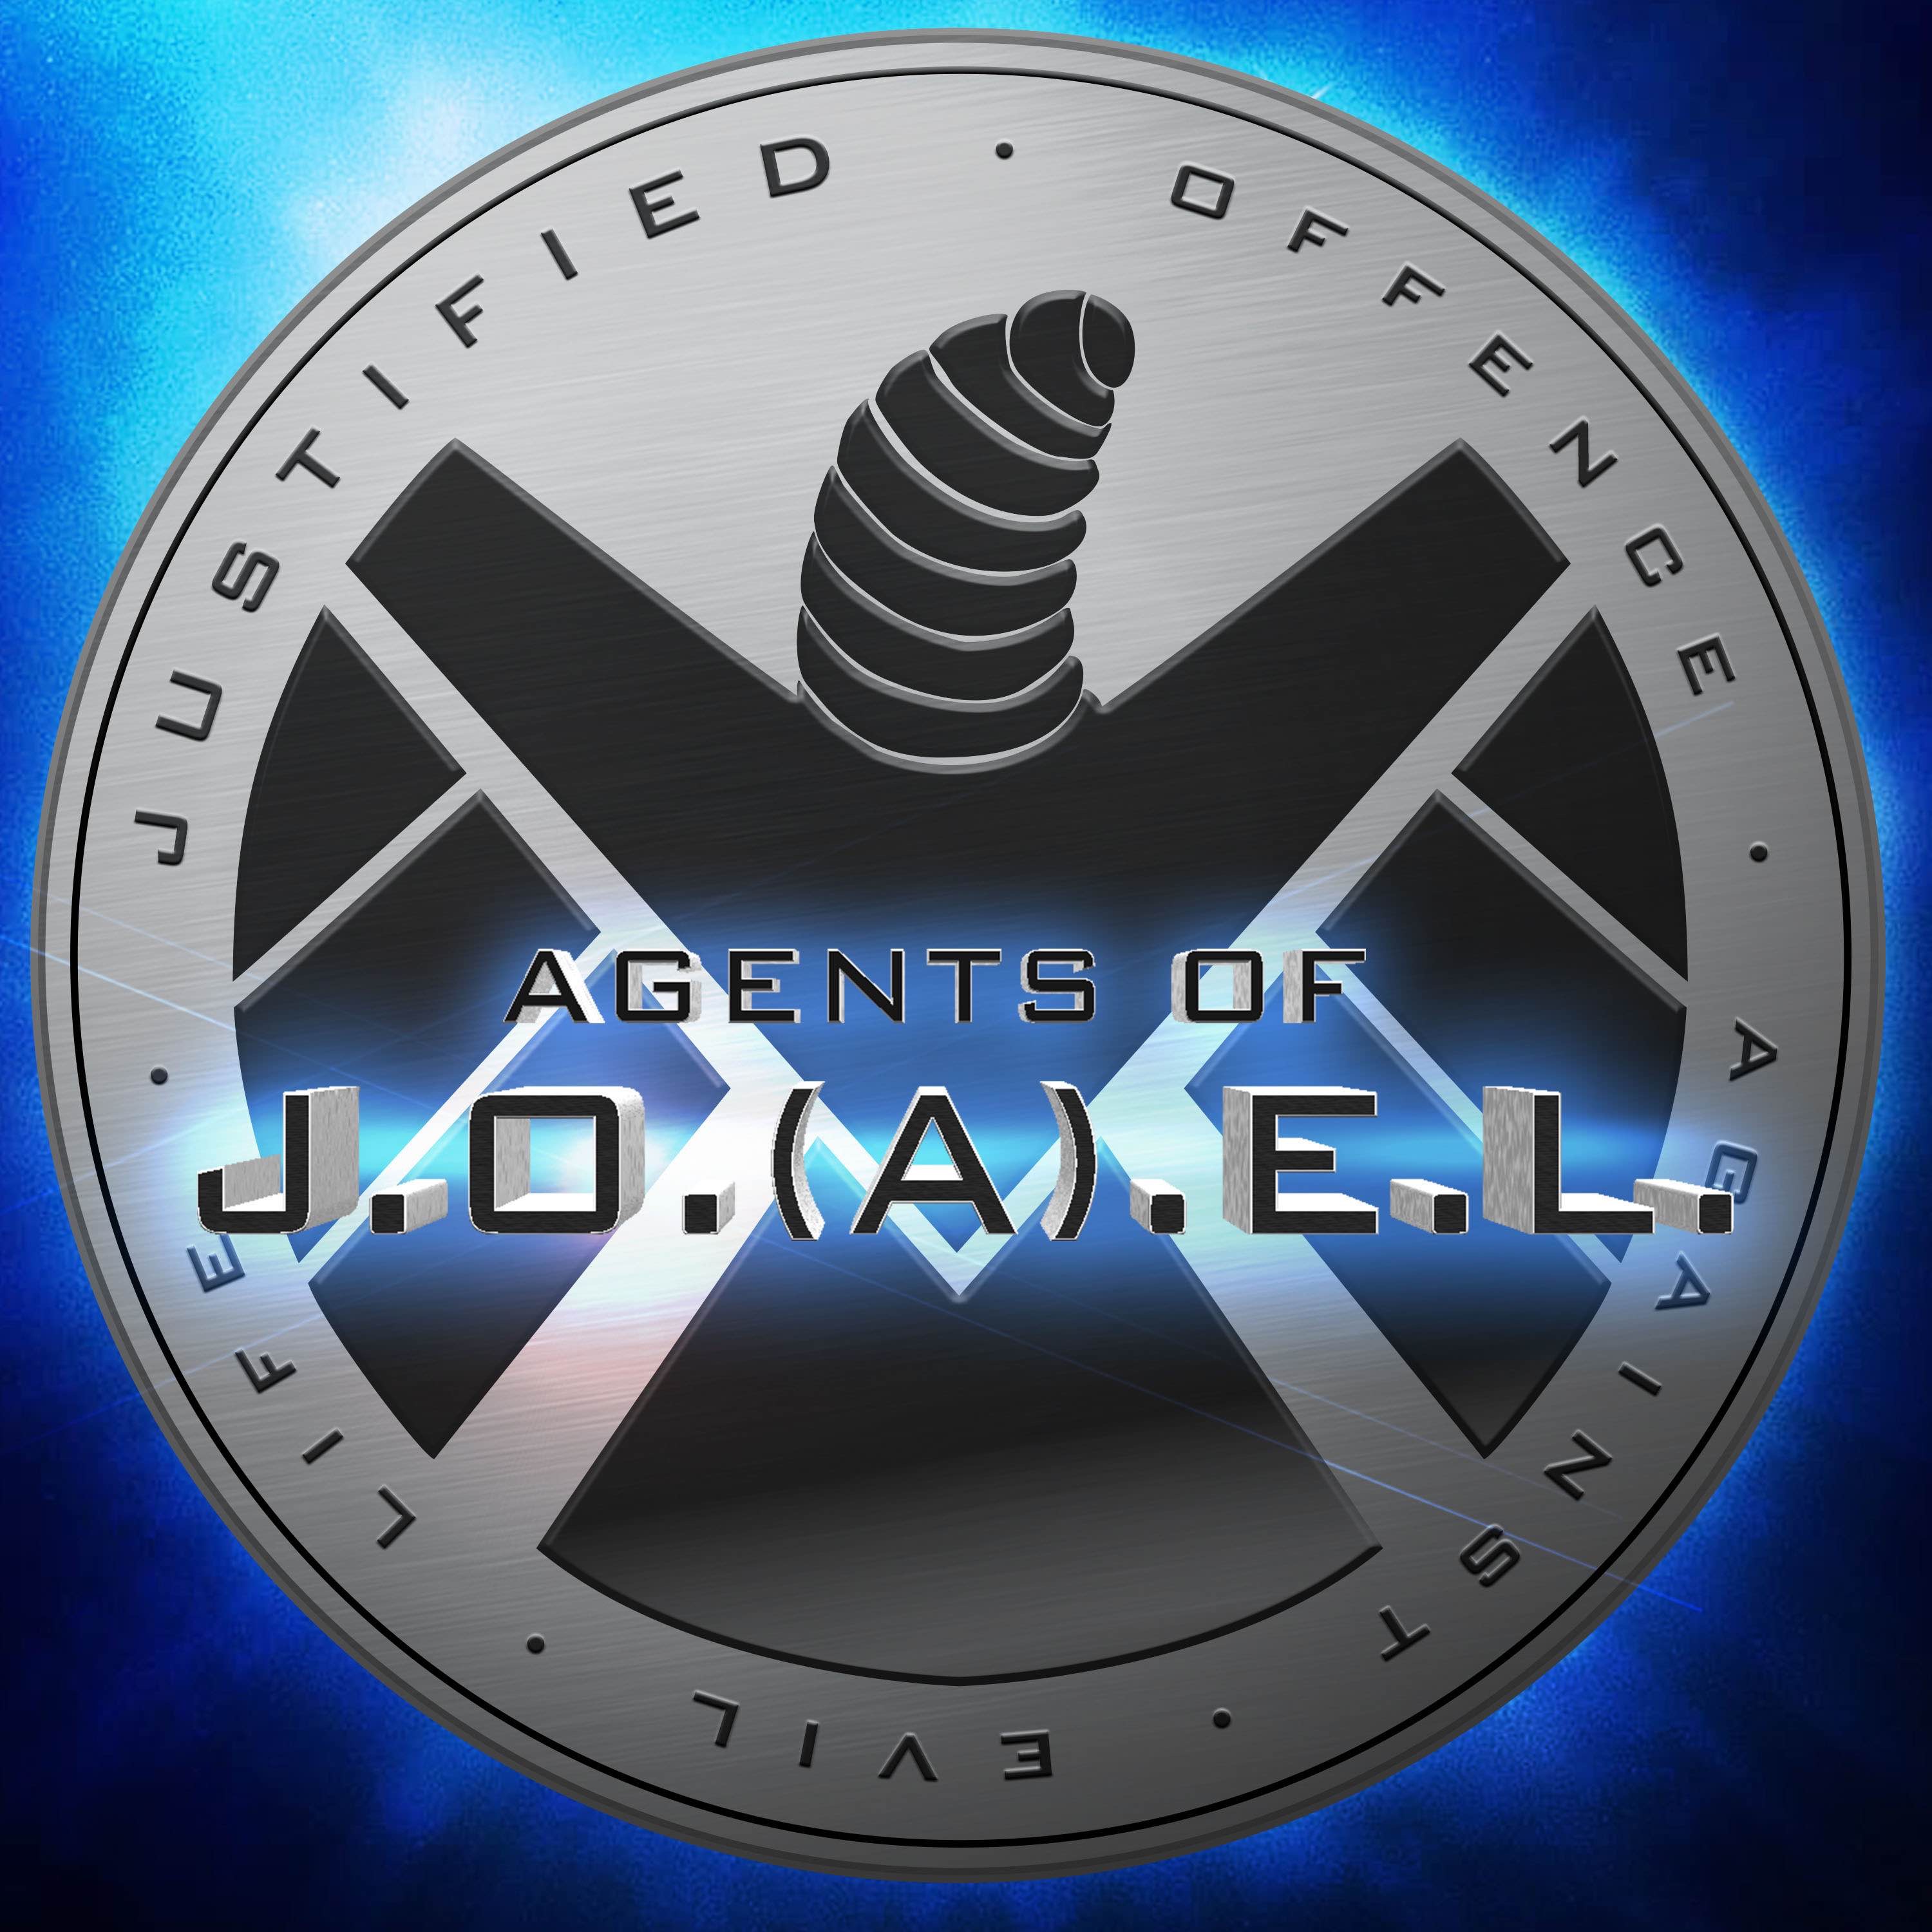 Agents of J.O.(a).E.L. The Christmas Project #2